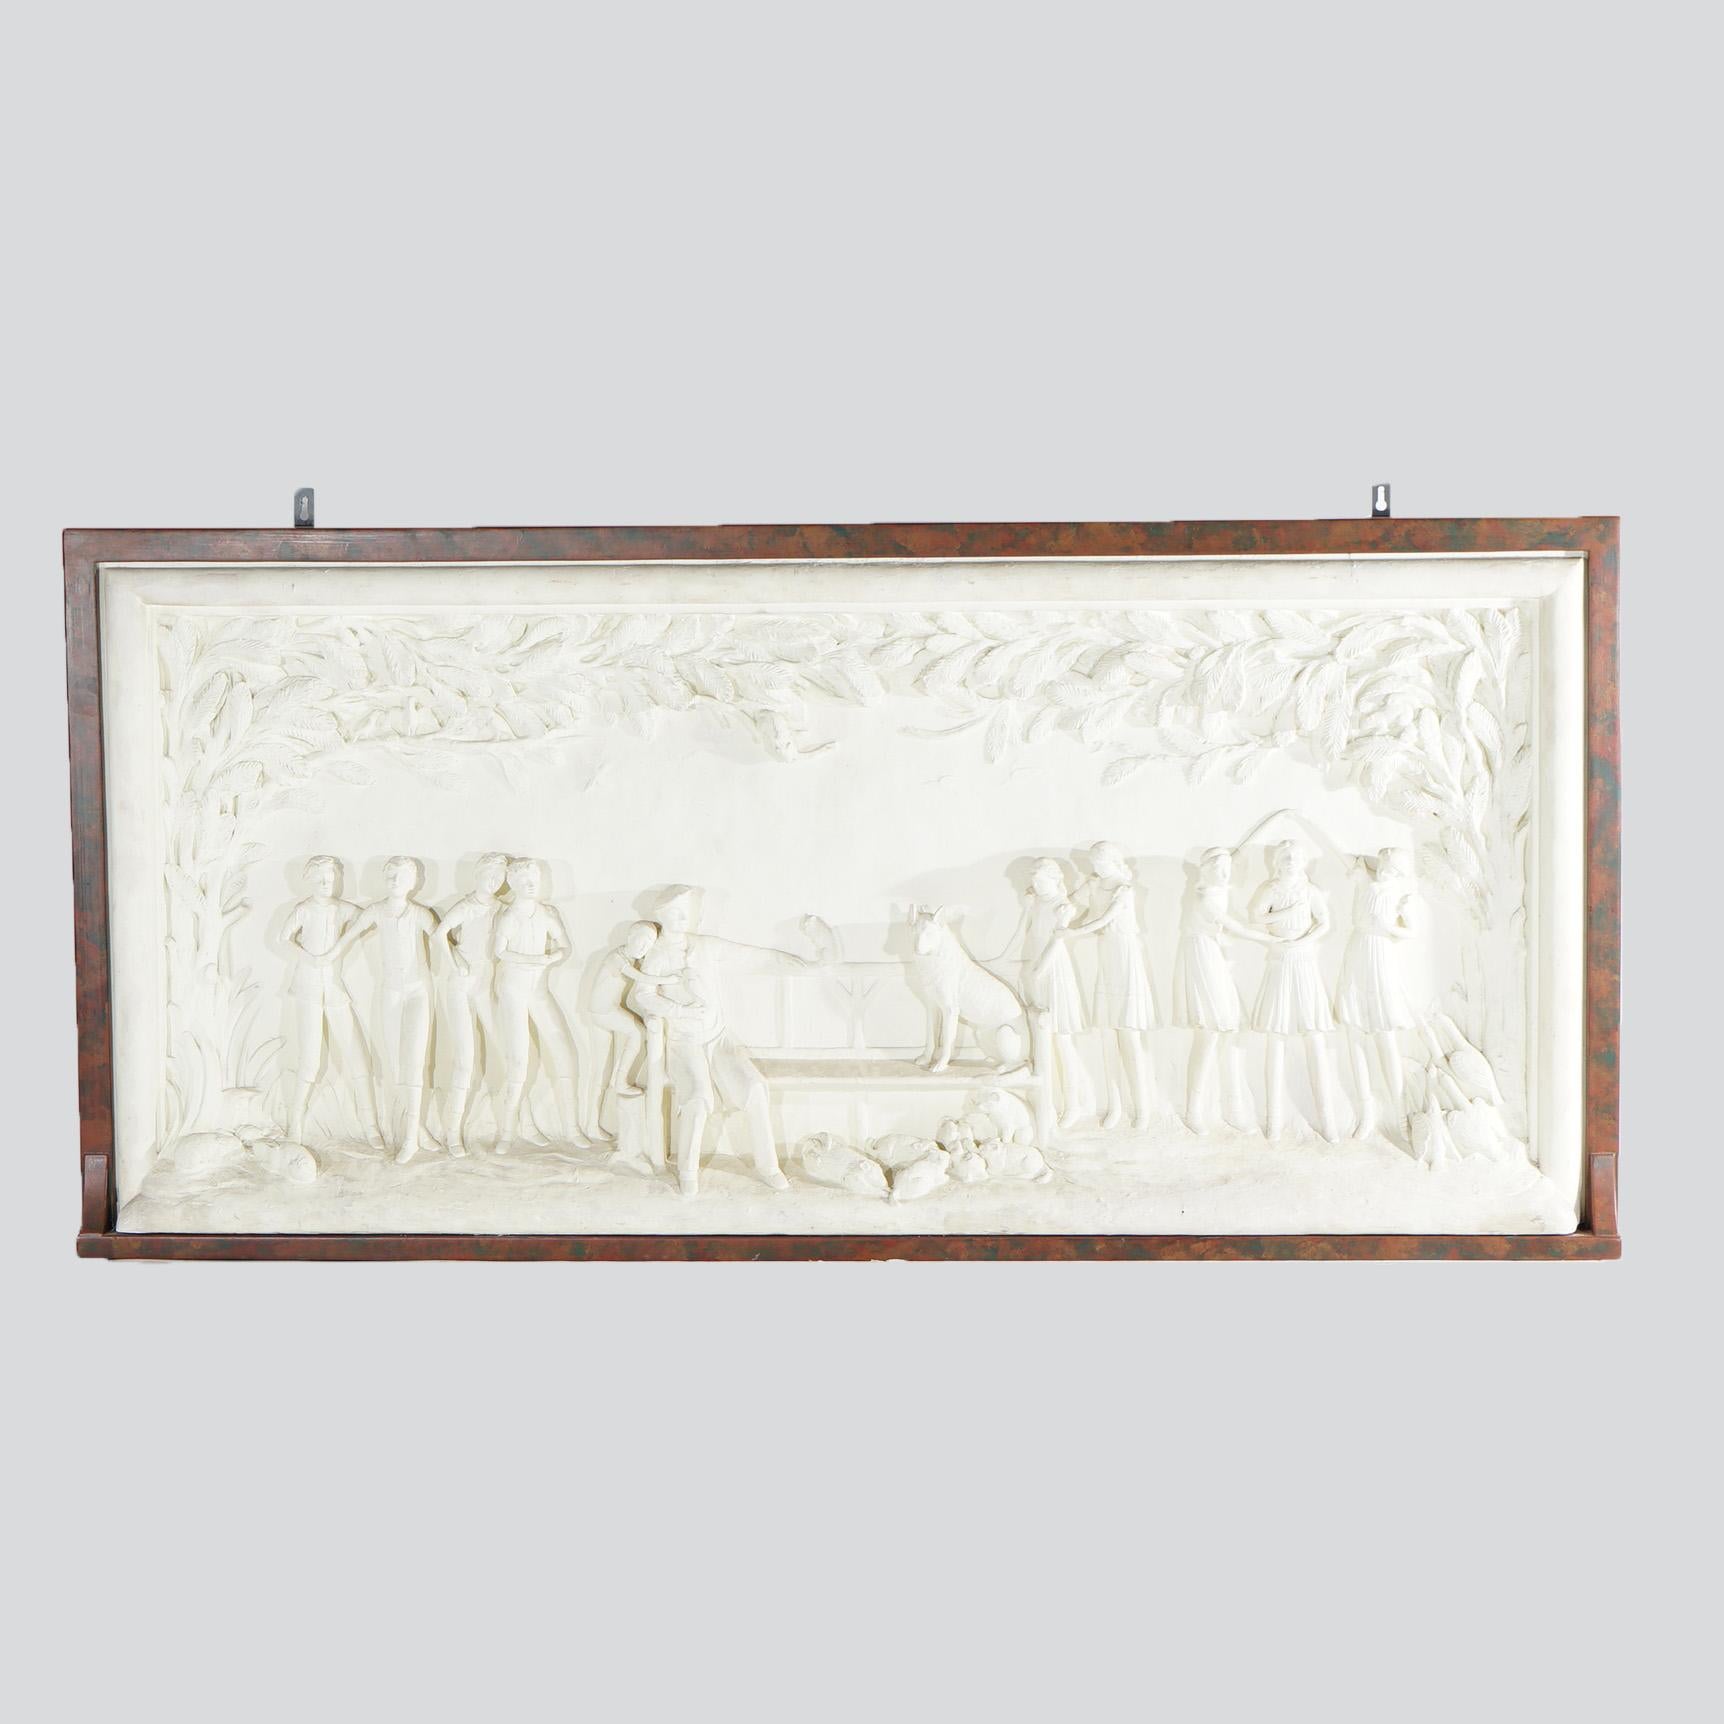 Molded Large Antique Framed Figural Plaster Grouping In High Relief, Farm Scene, c1920